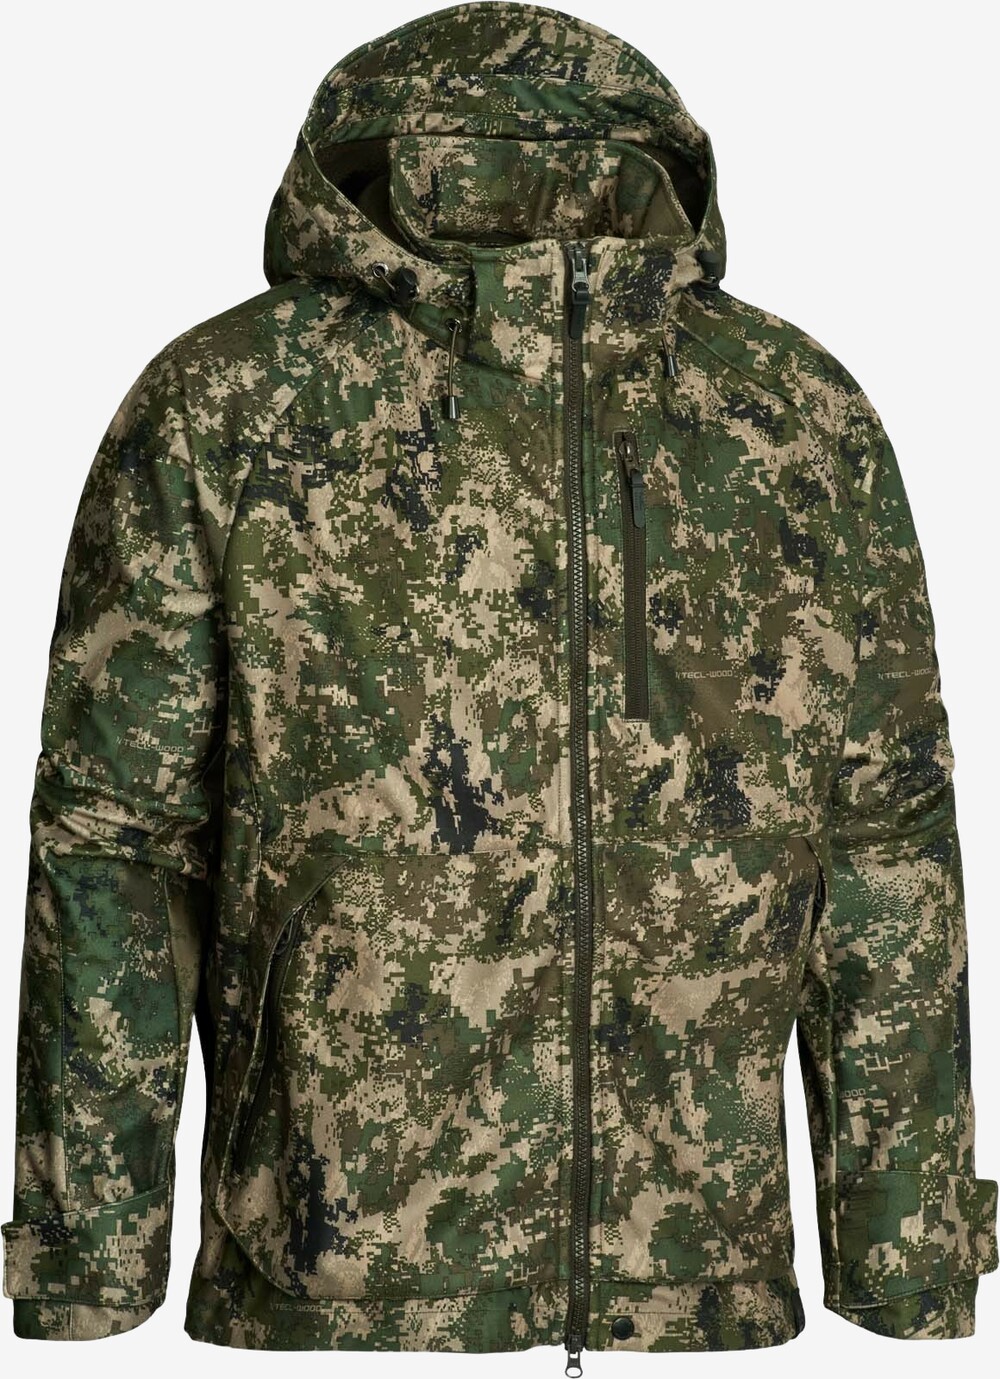 Northern Hunting - Torg Falki opt9 (Camouflage) - XL